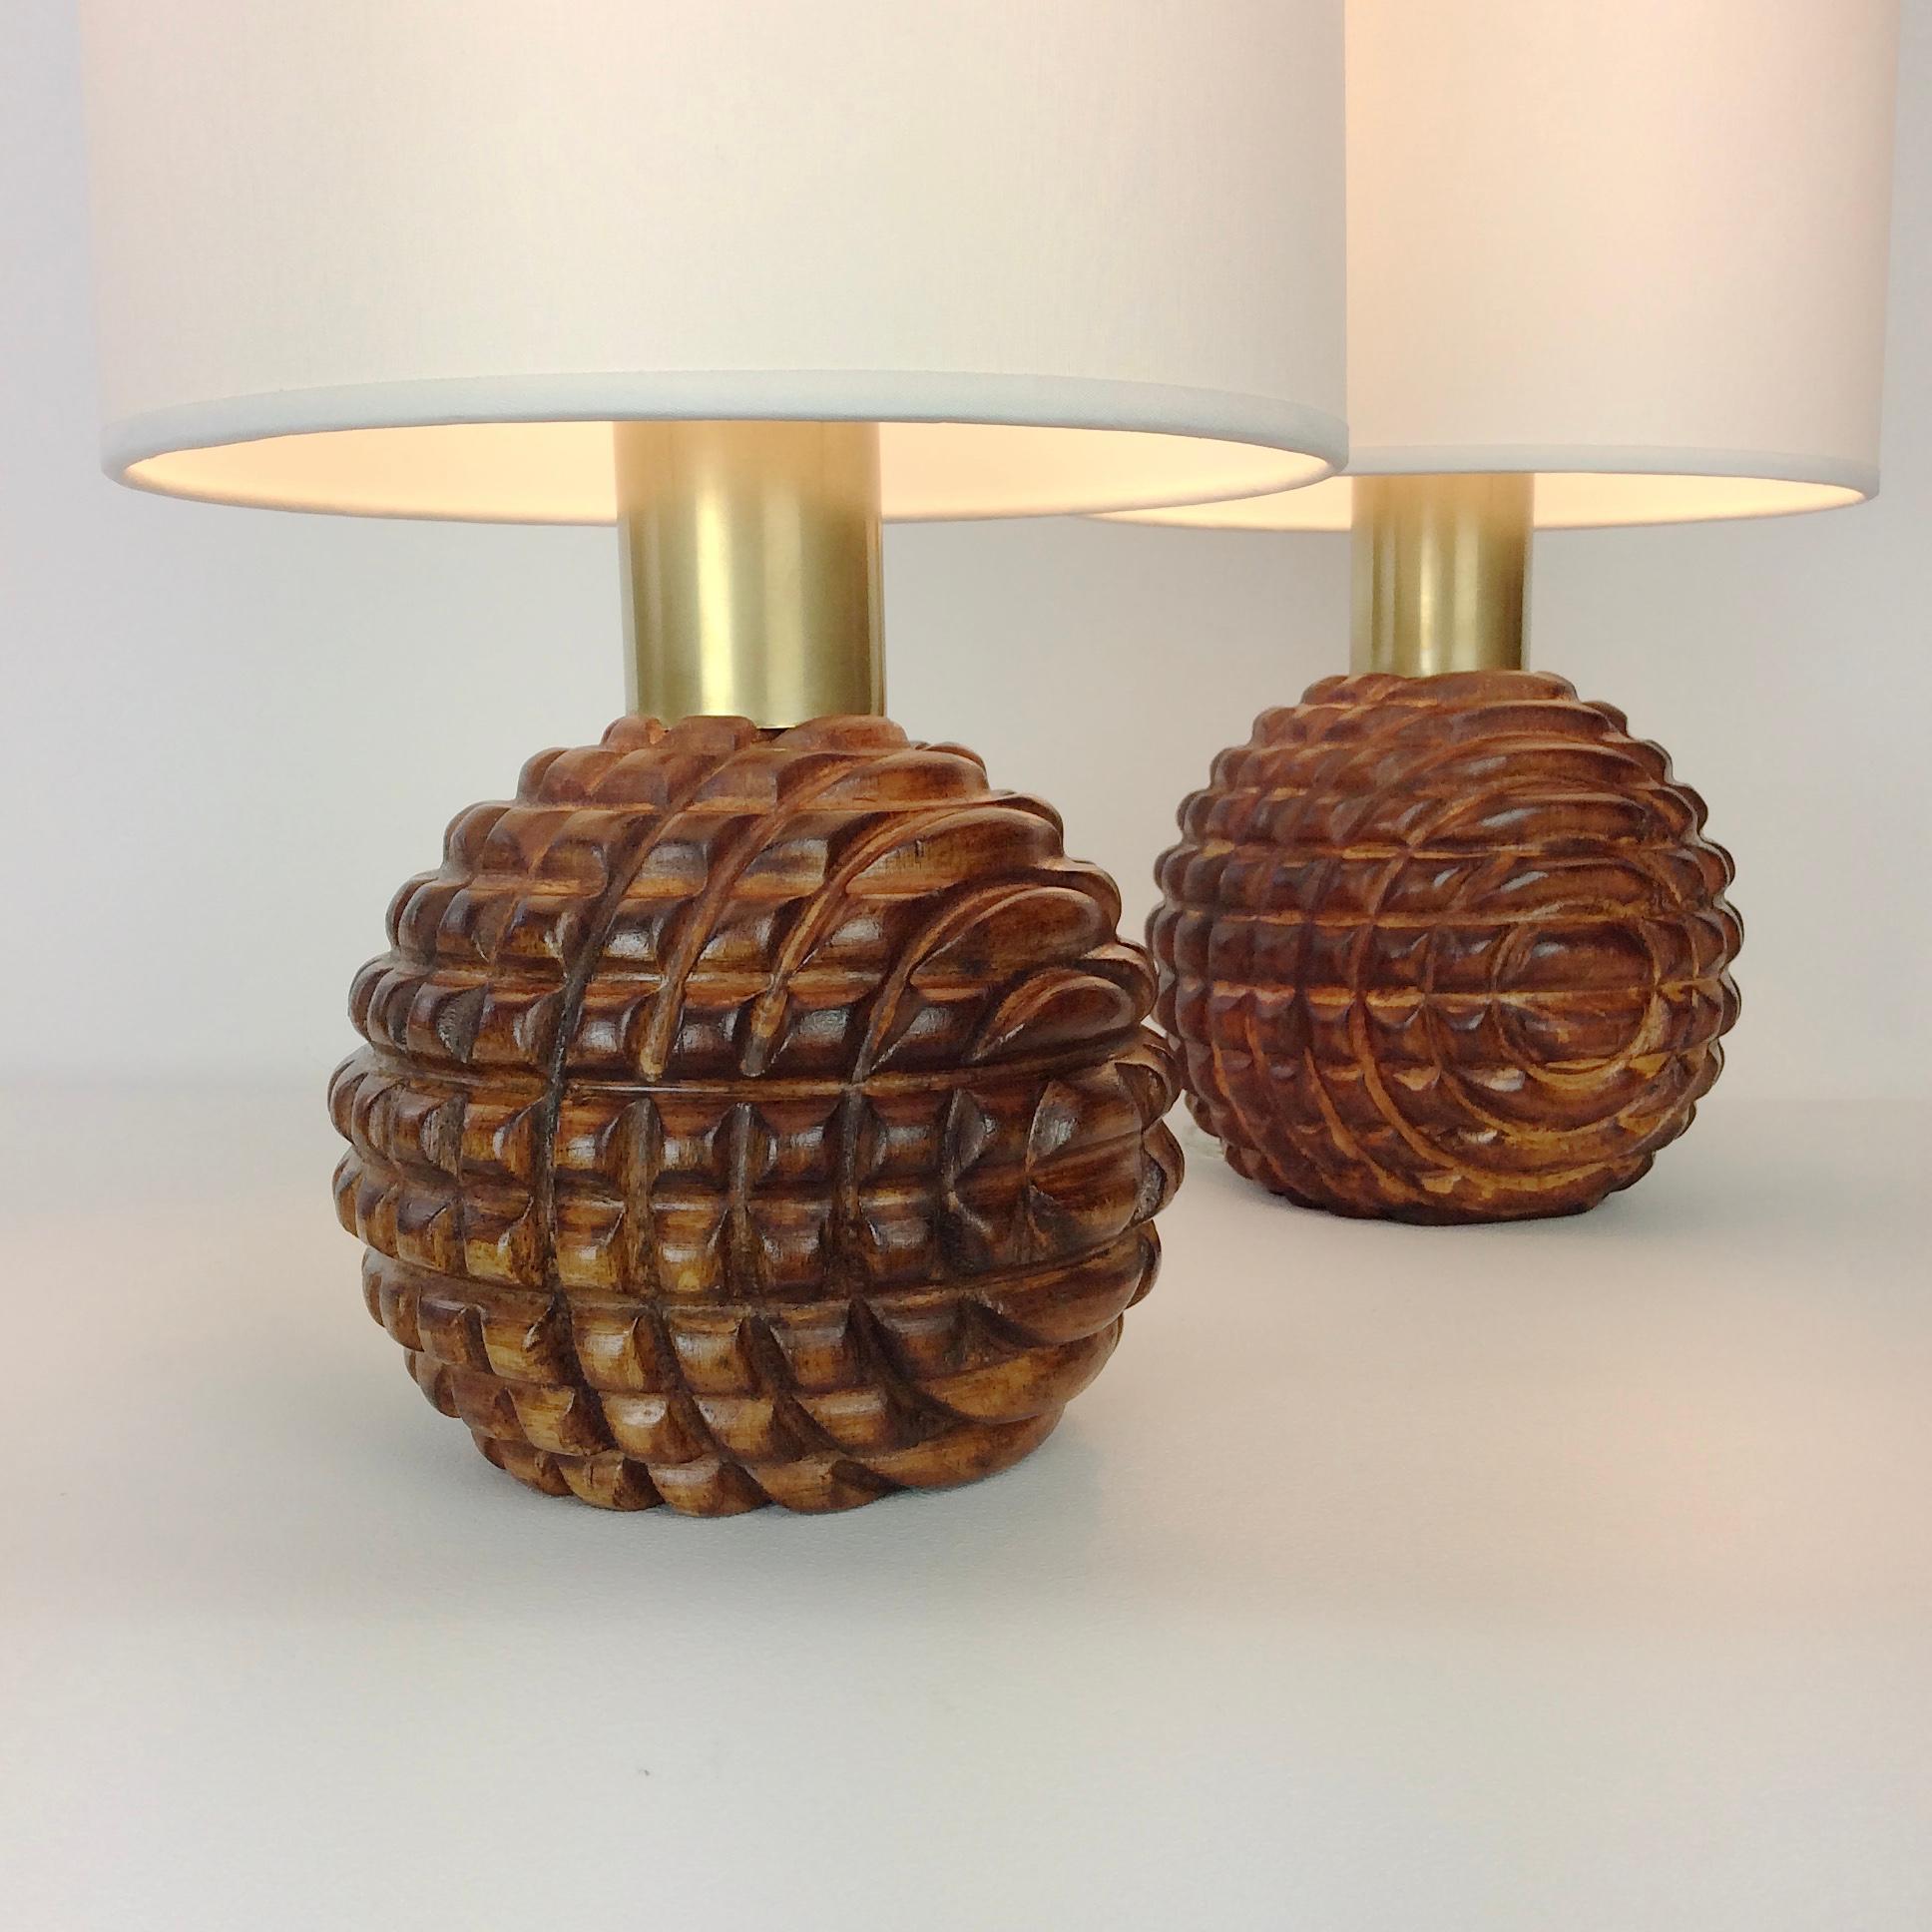 Pair of wood table lamps, circa 1970, Italy.
Carved wood balls, brass details, new white fabric shades.
Rewired.
Dimensions: total height: 42 cm, diameter of the shade: 19 cm, diameter of the ball: 14 cm.
All purchases are covered by our Buyer